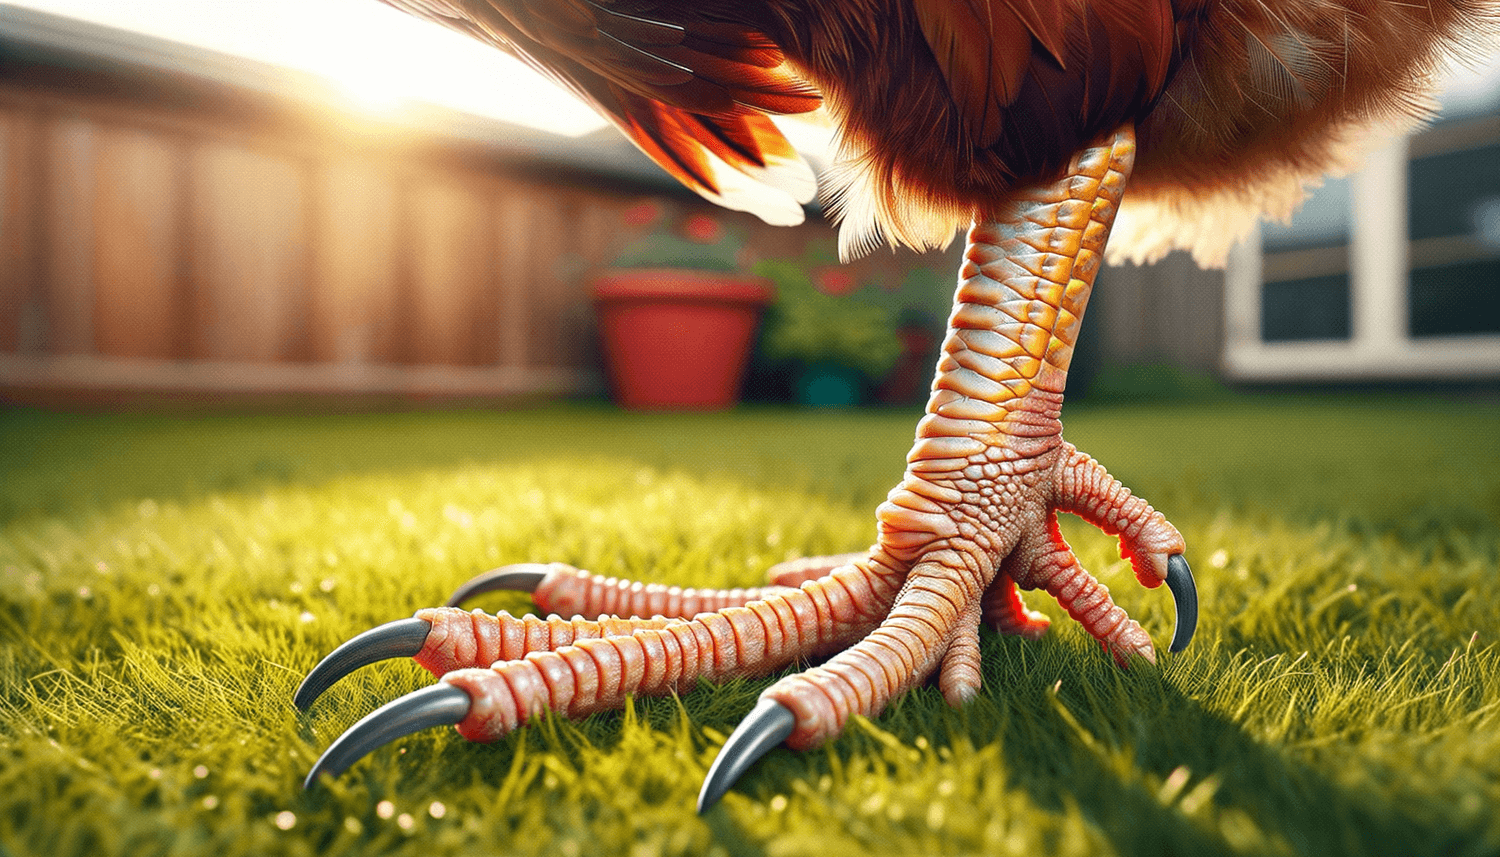 Do Chickens Have Large Talons?